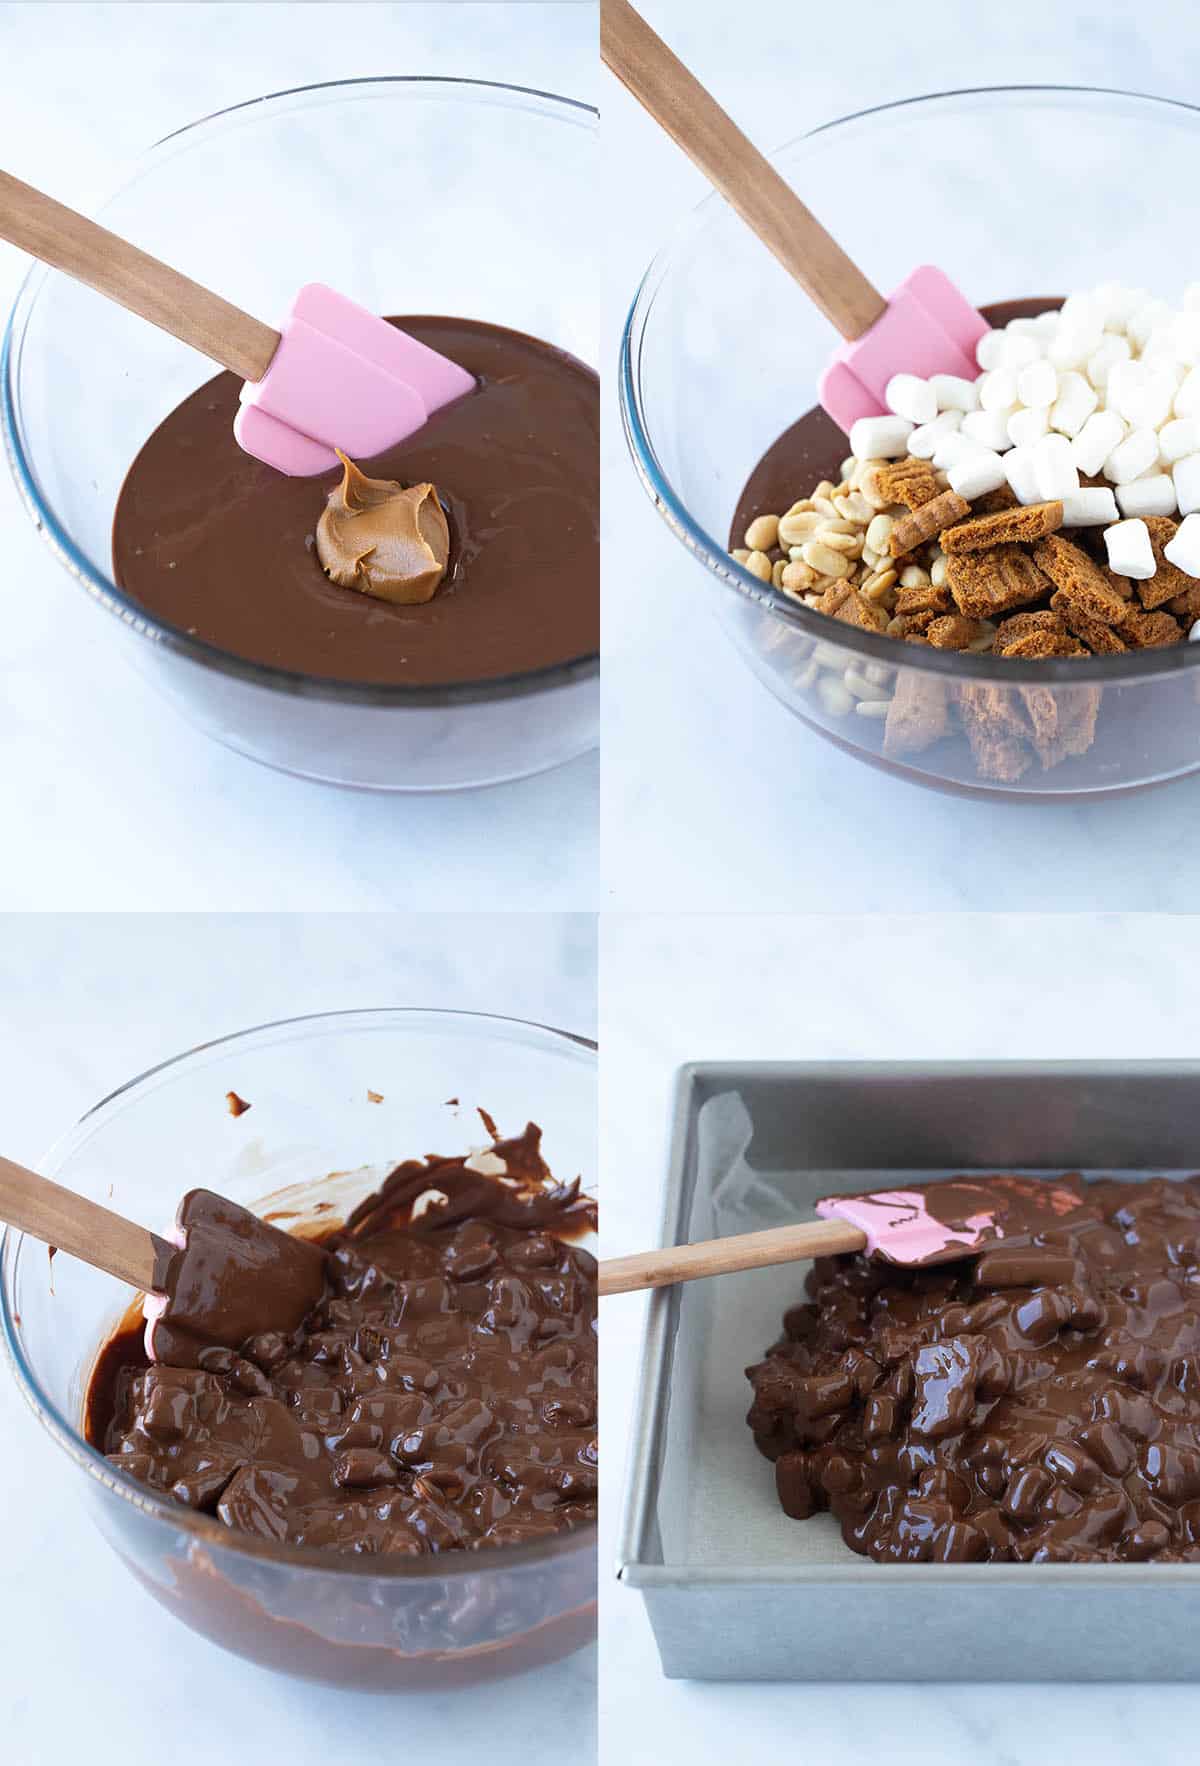 Step-by-step photos showing how to make Biscoff Rocky Road from scratch.